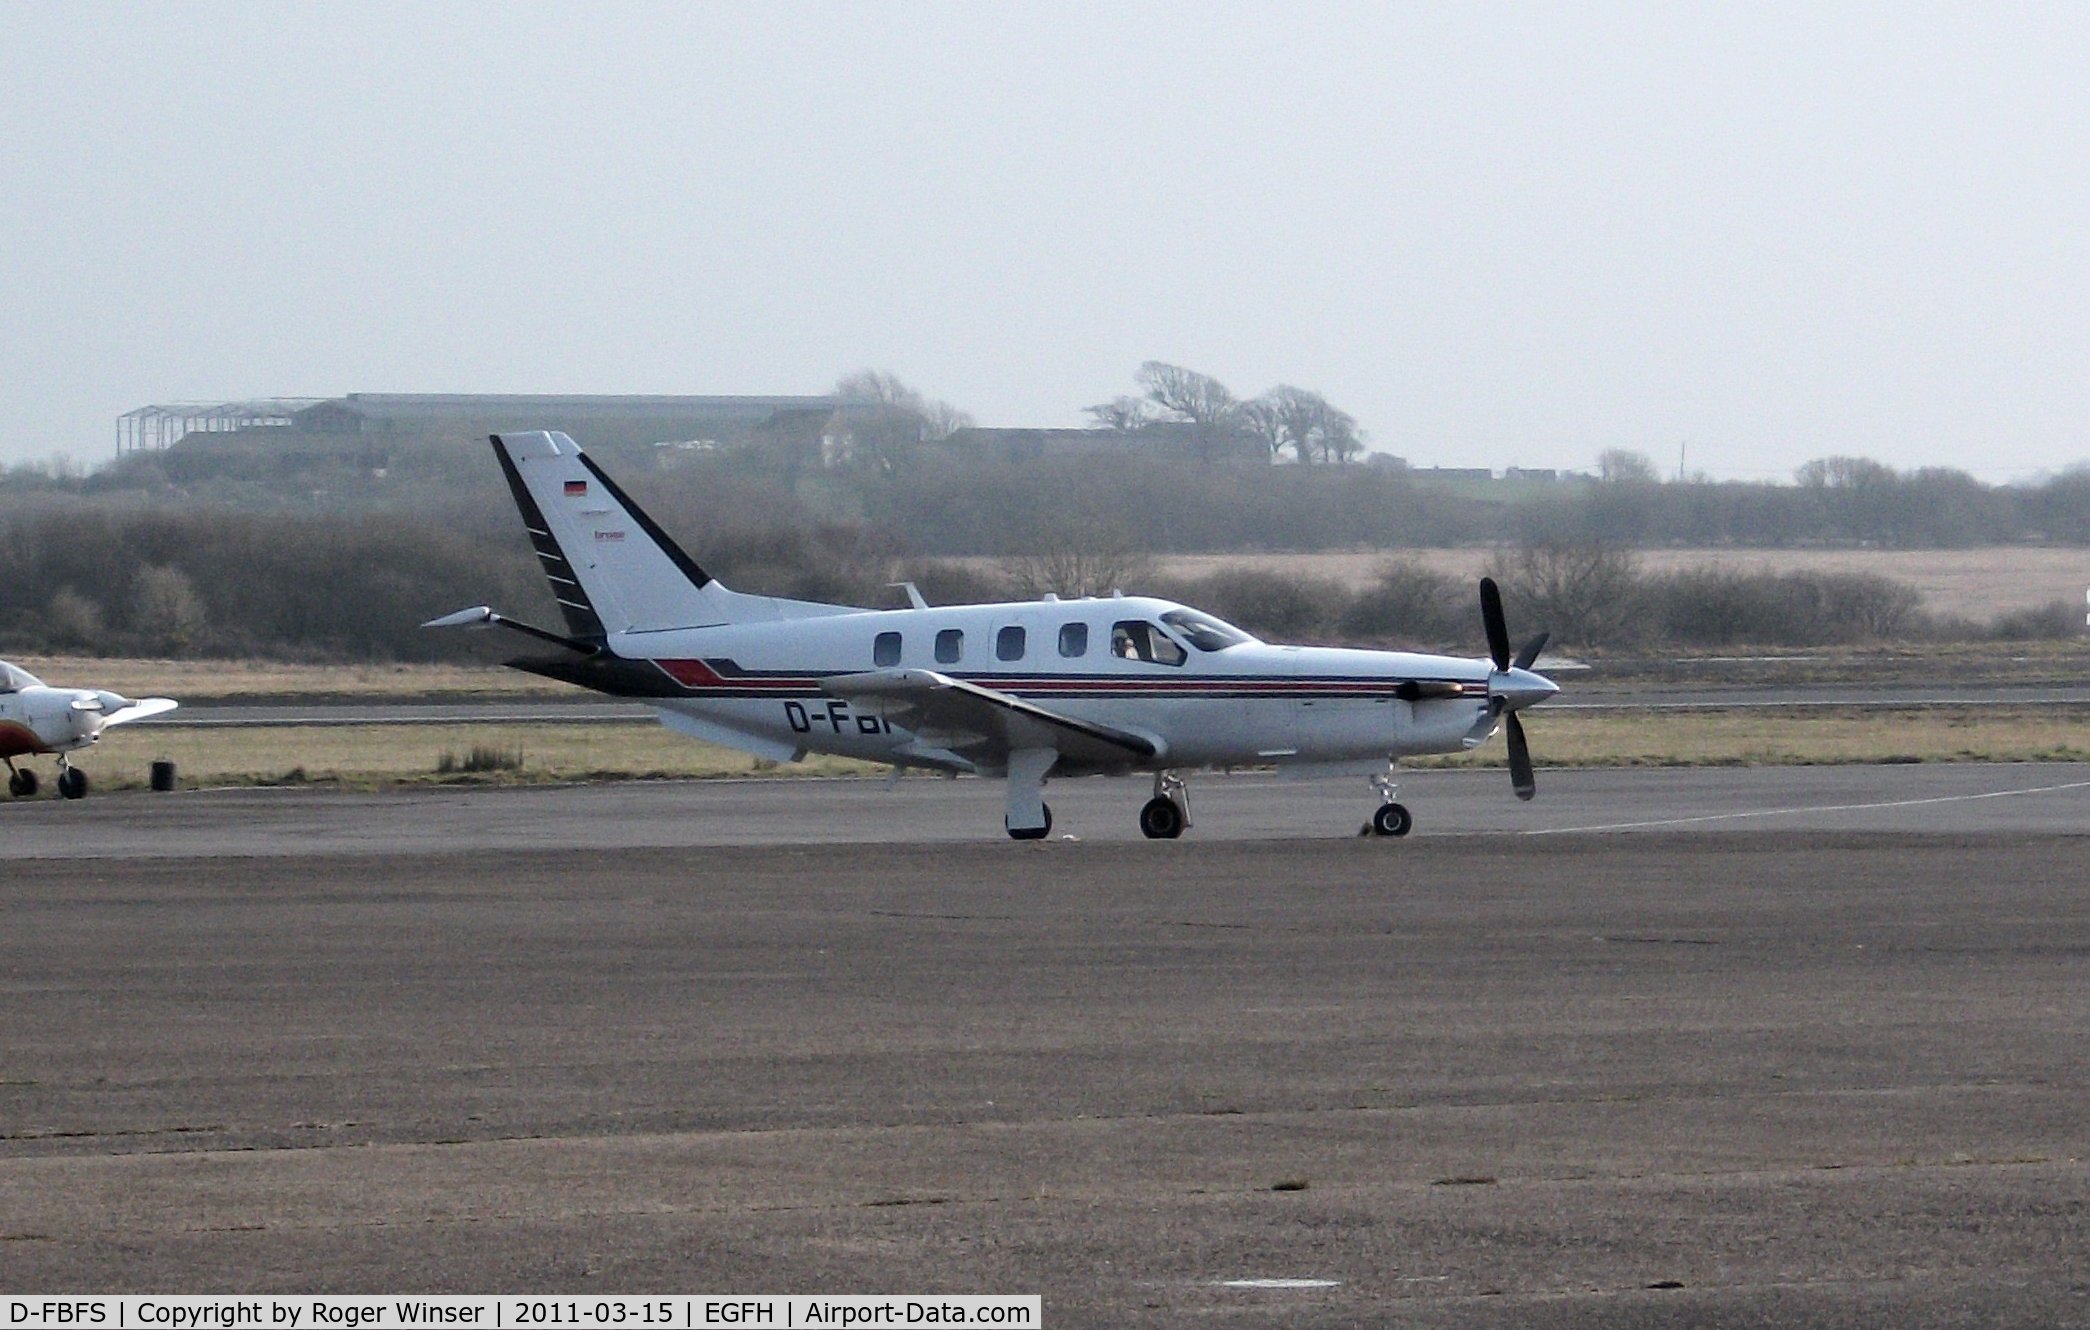 D-FBFS, 2006 Socata TBM-850 C/N 387, Visiting Swansea Airport on a misty day.